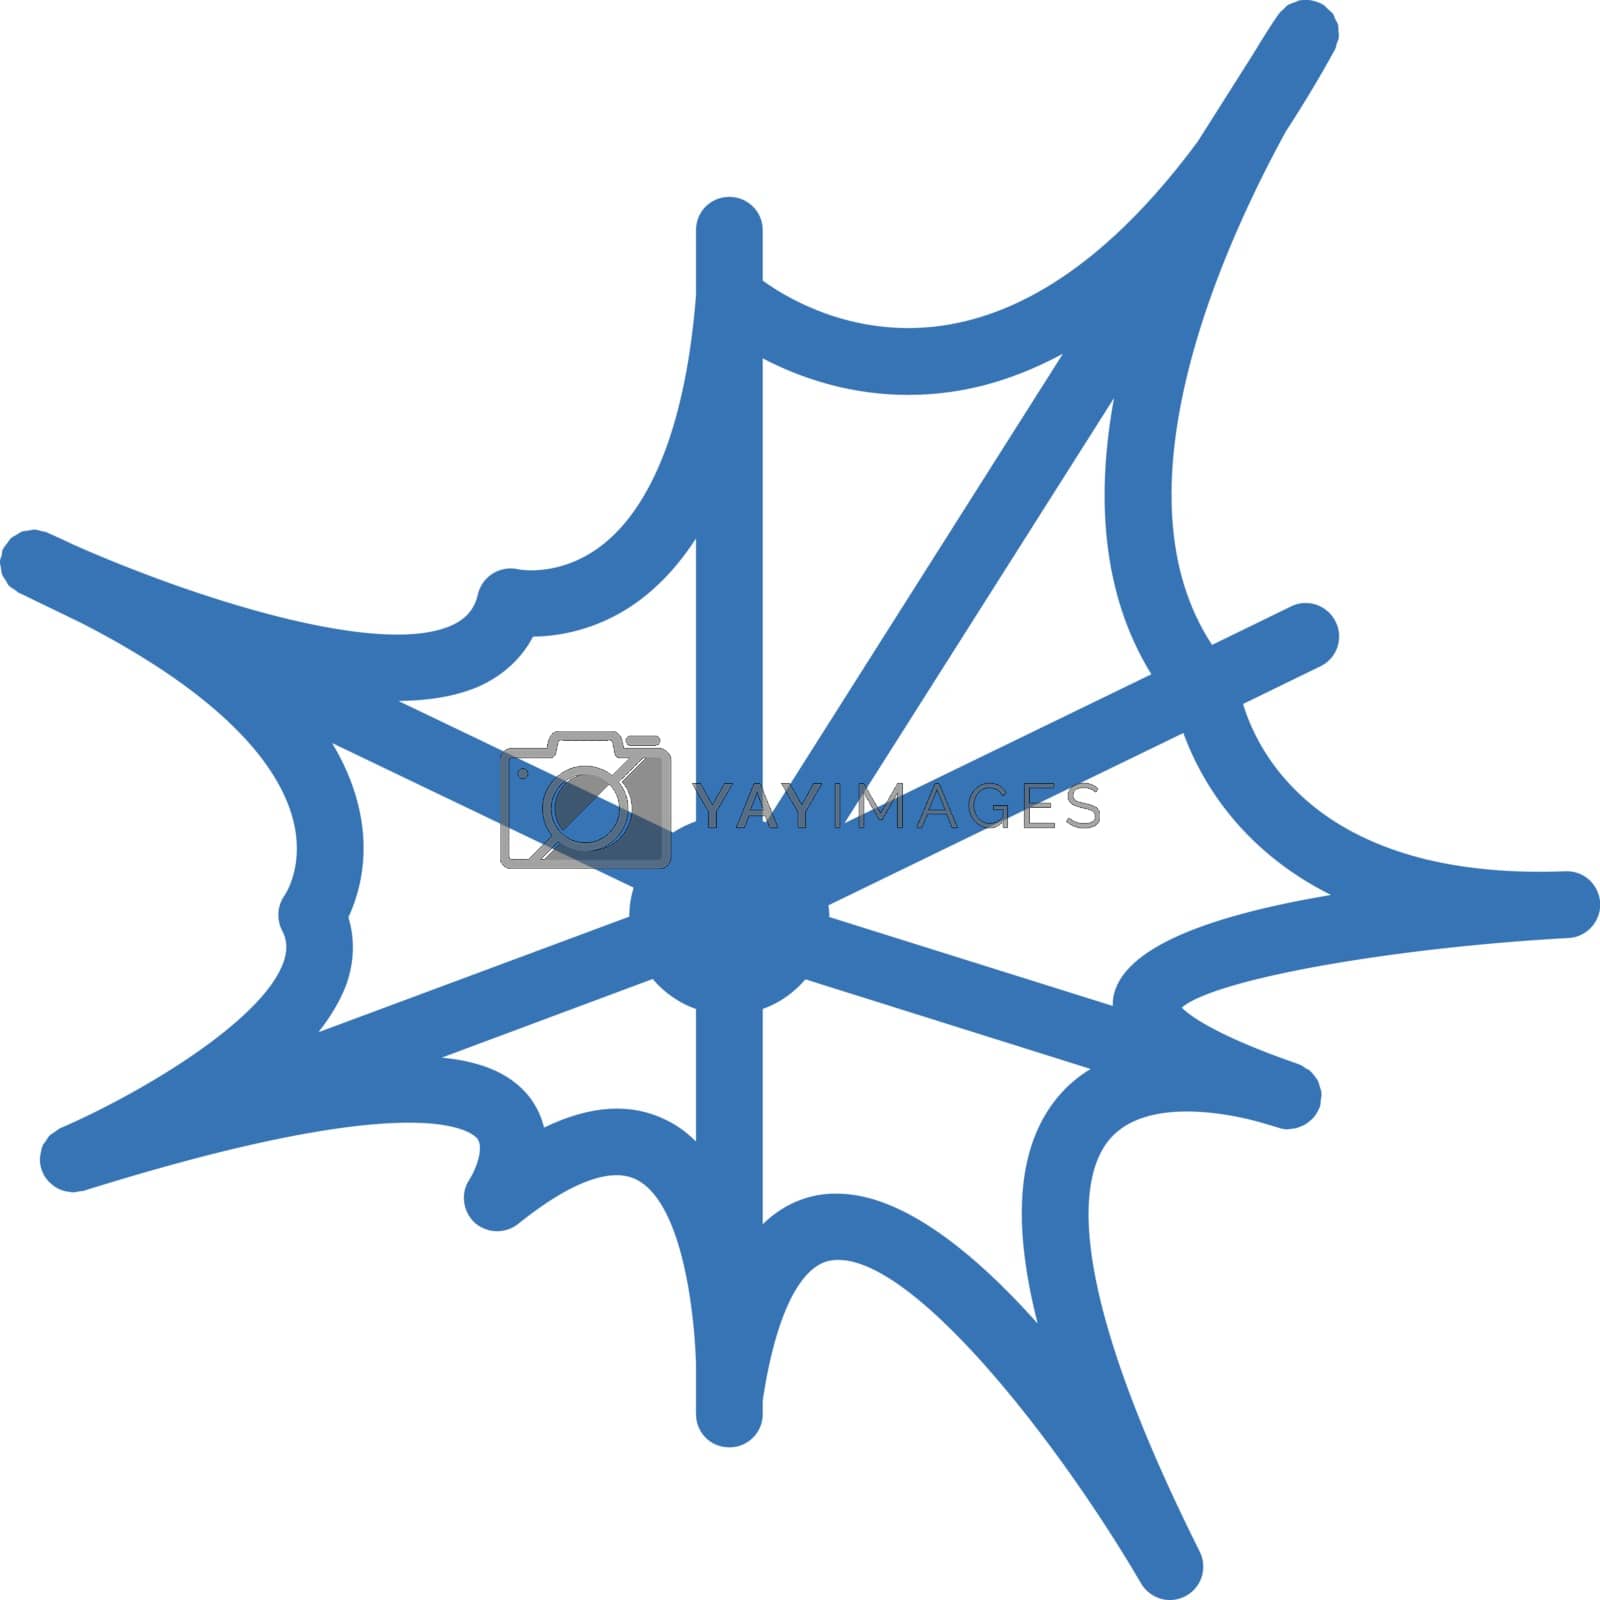 Royalty free image of spider by vectorstall